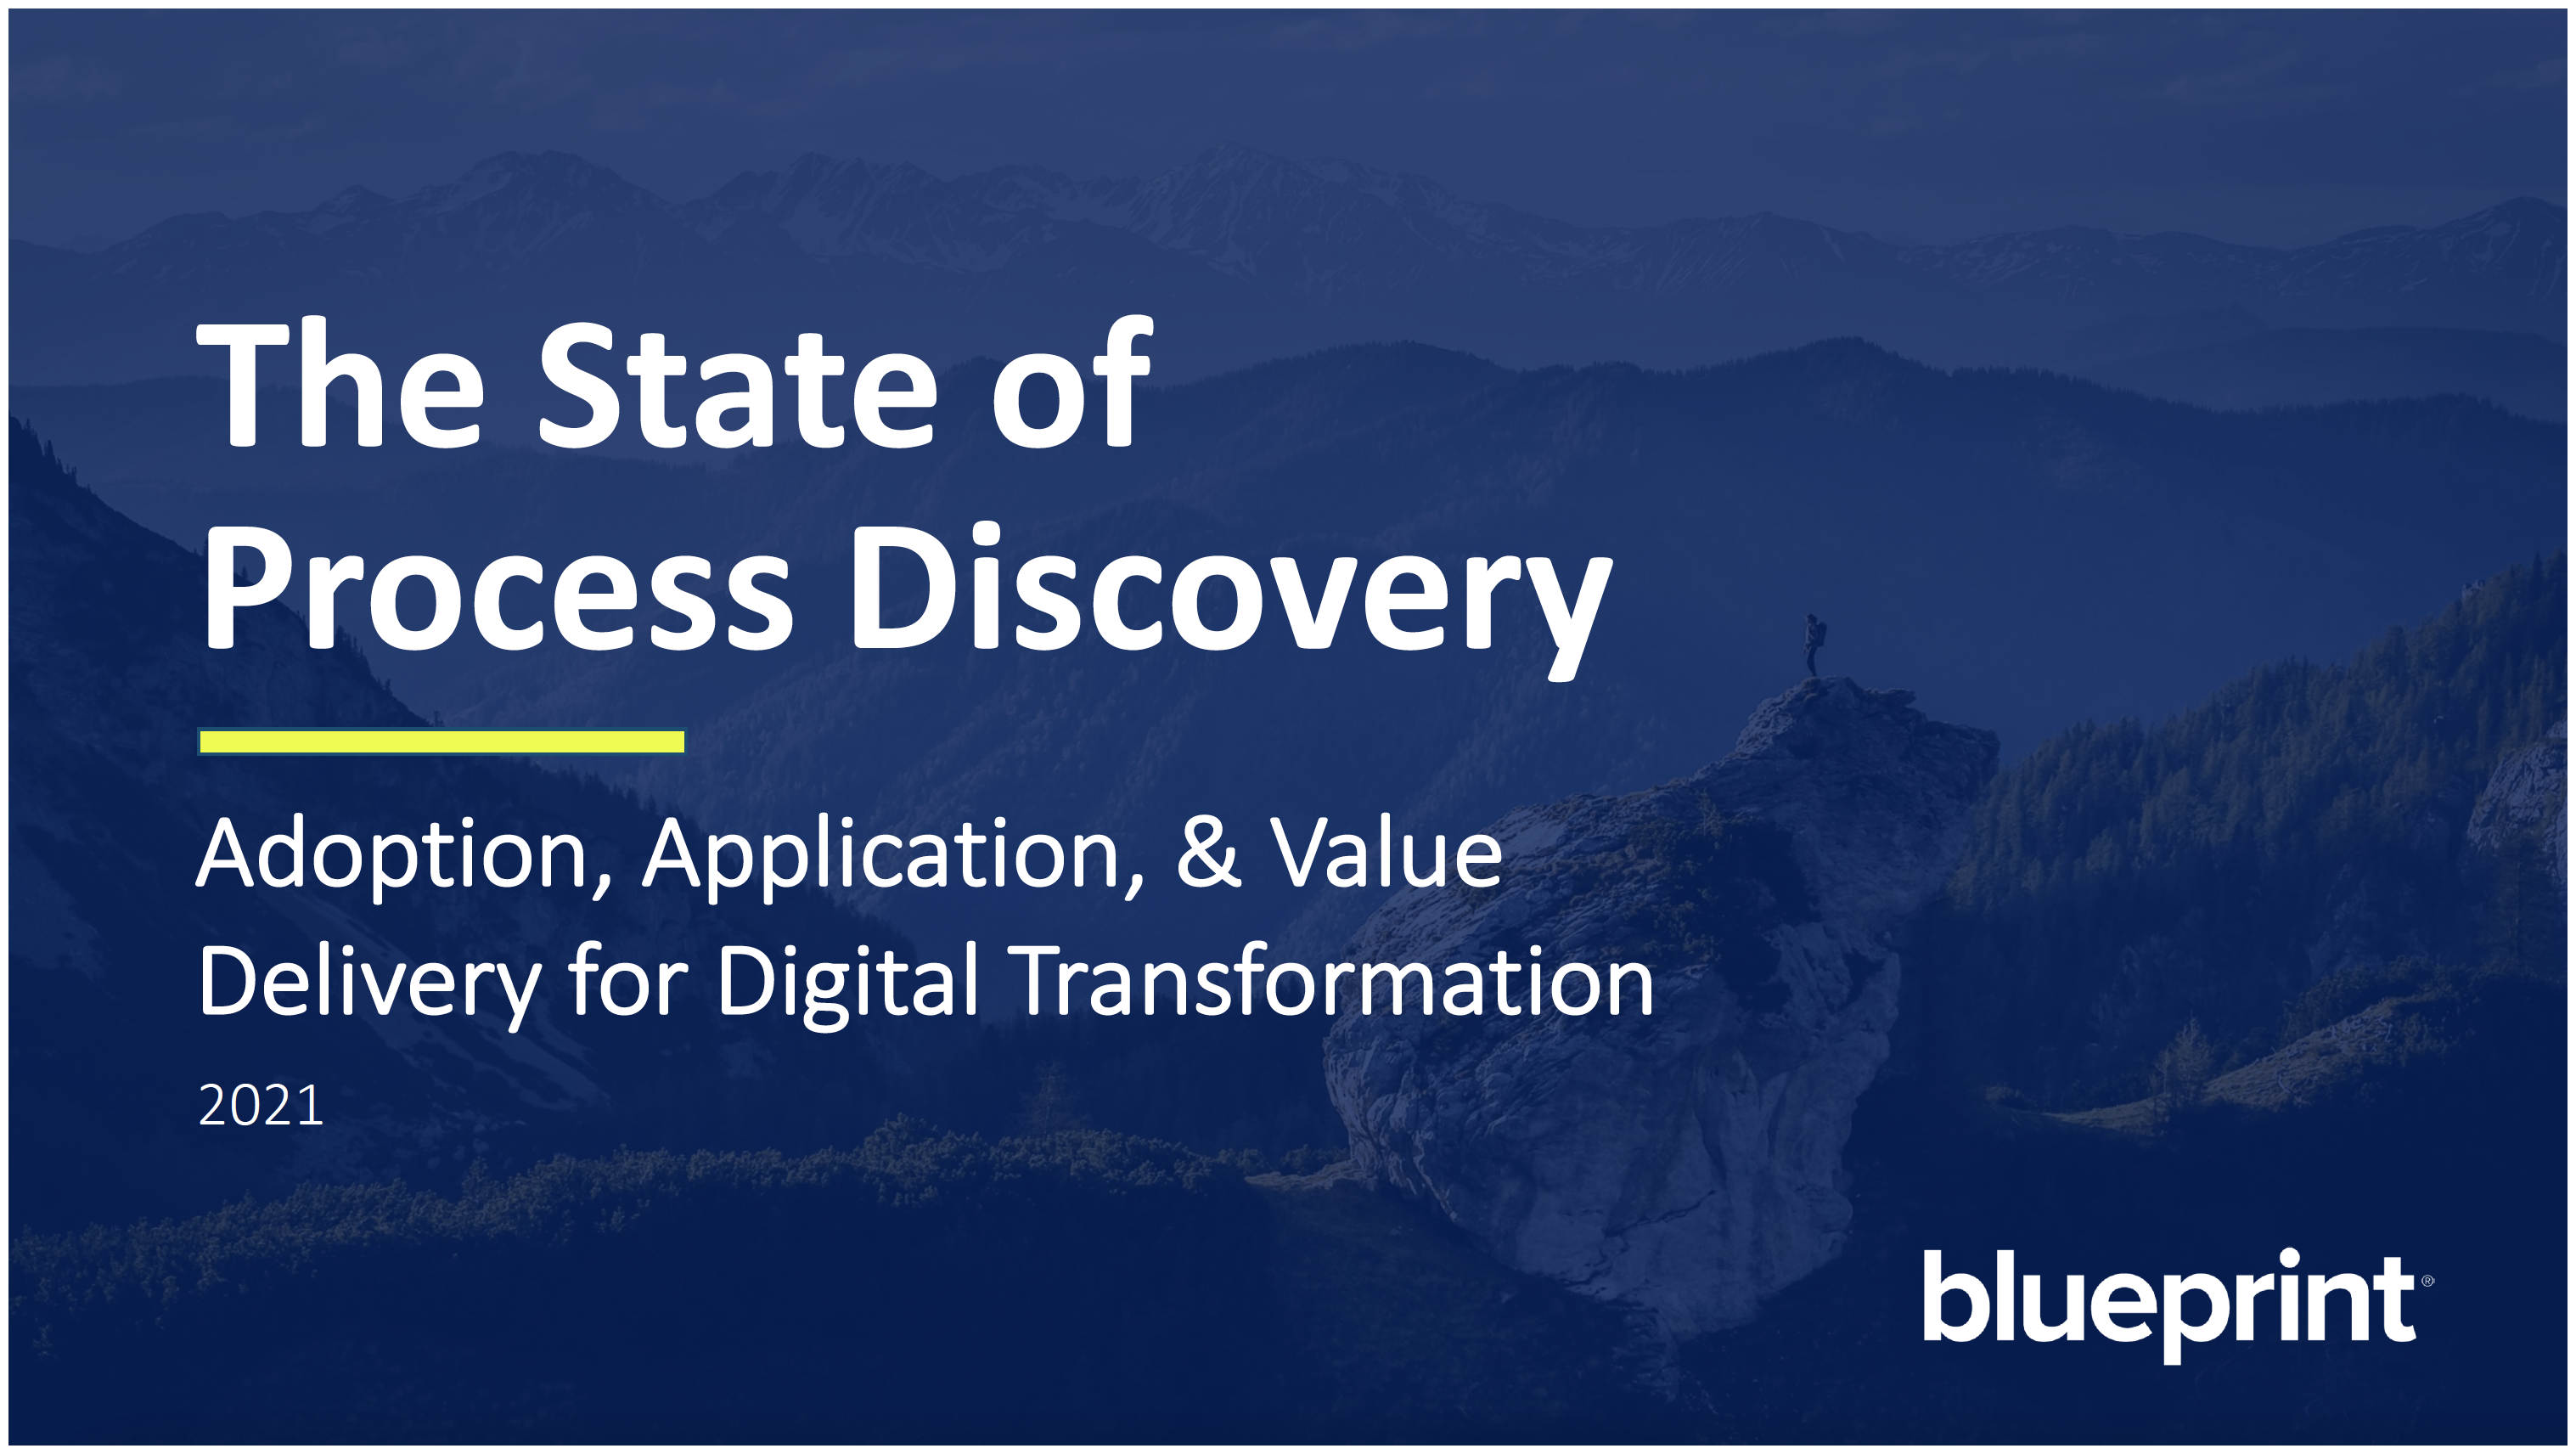 The-State-of-Process-Discovery-2021-Blueprint-2